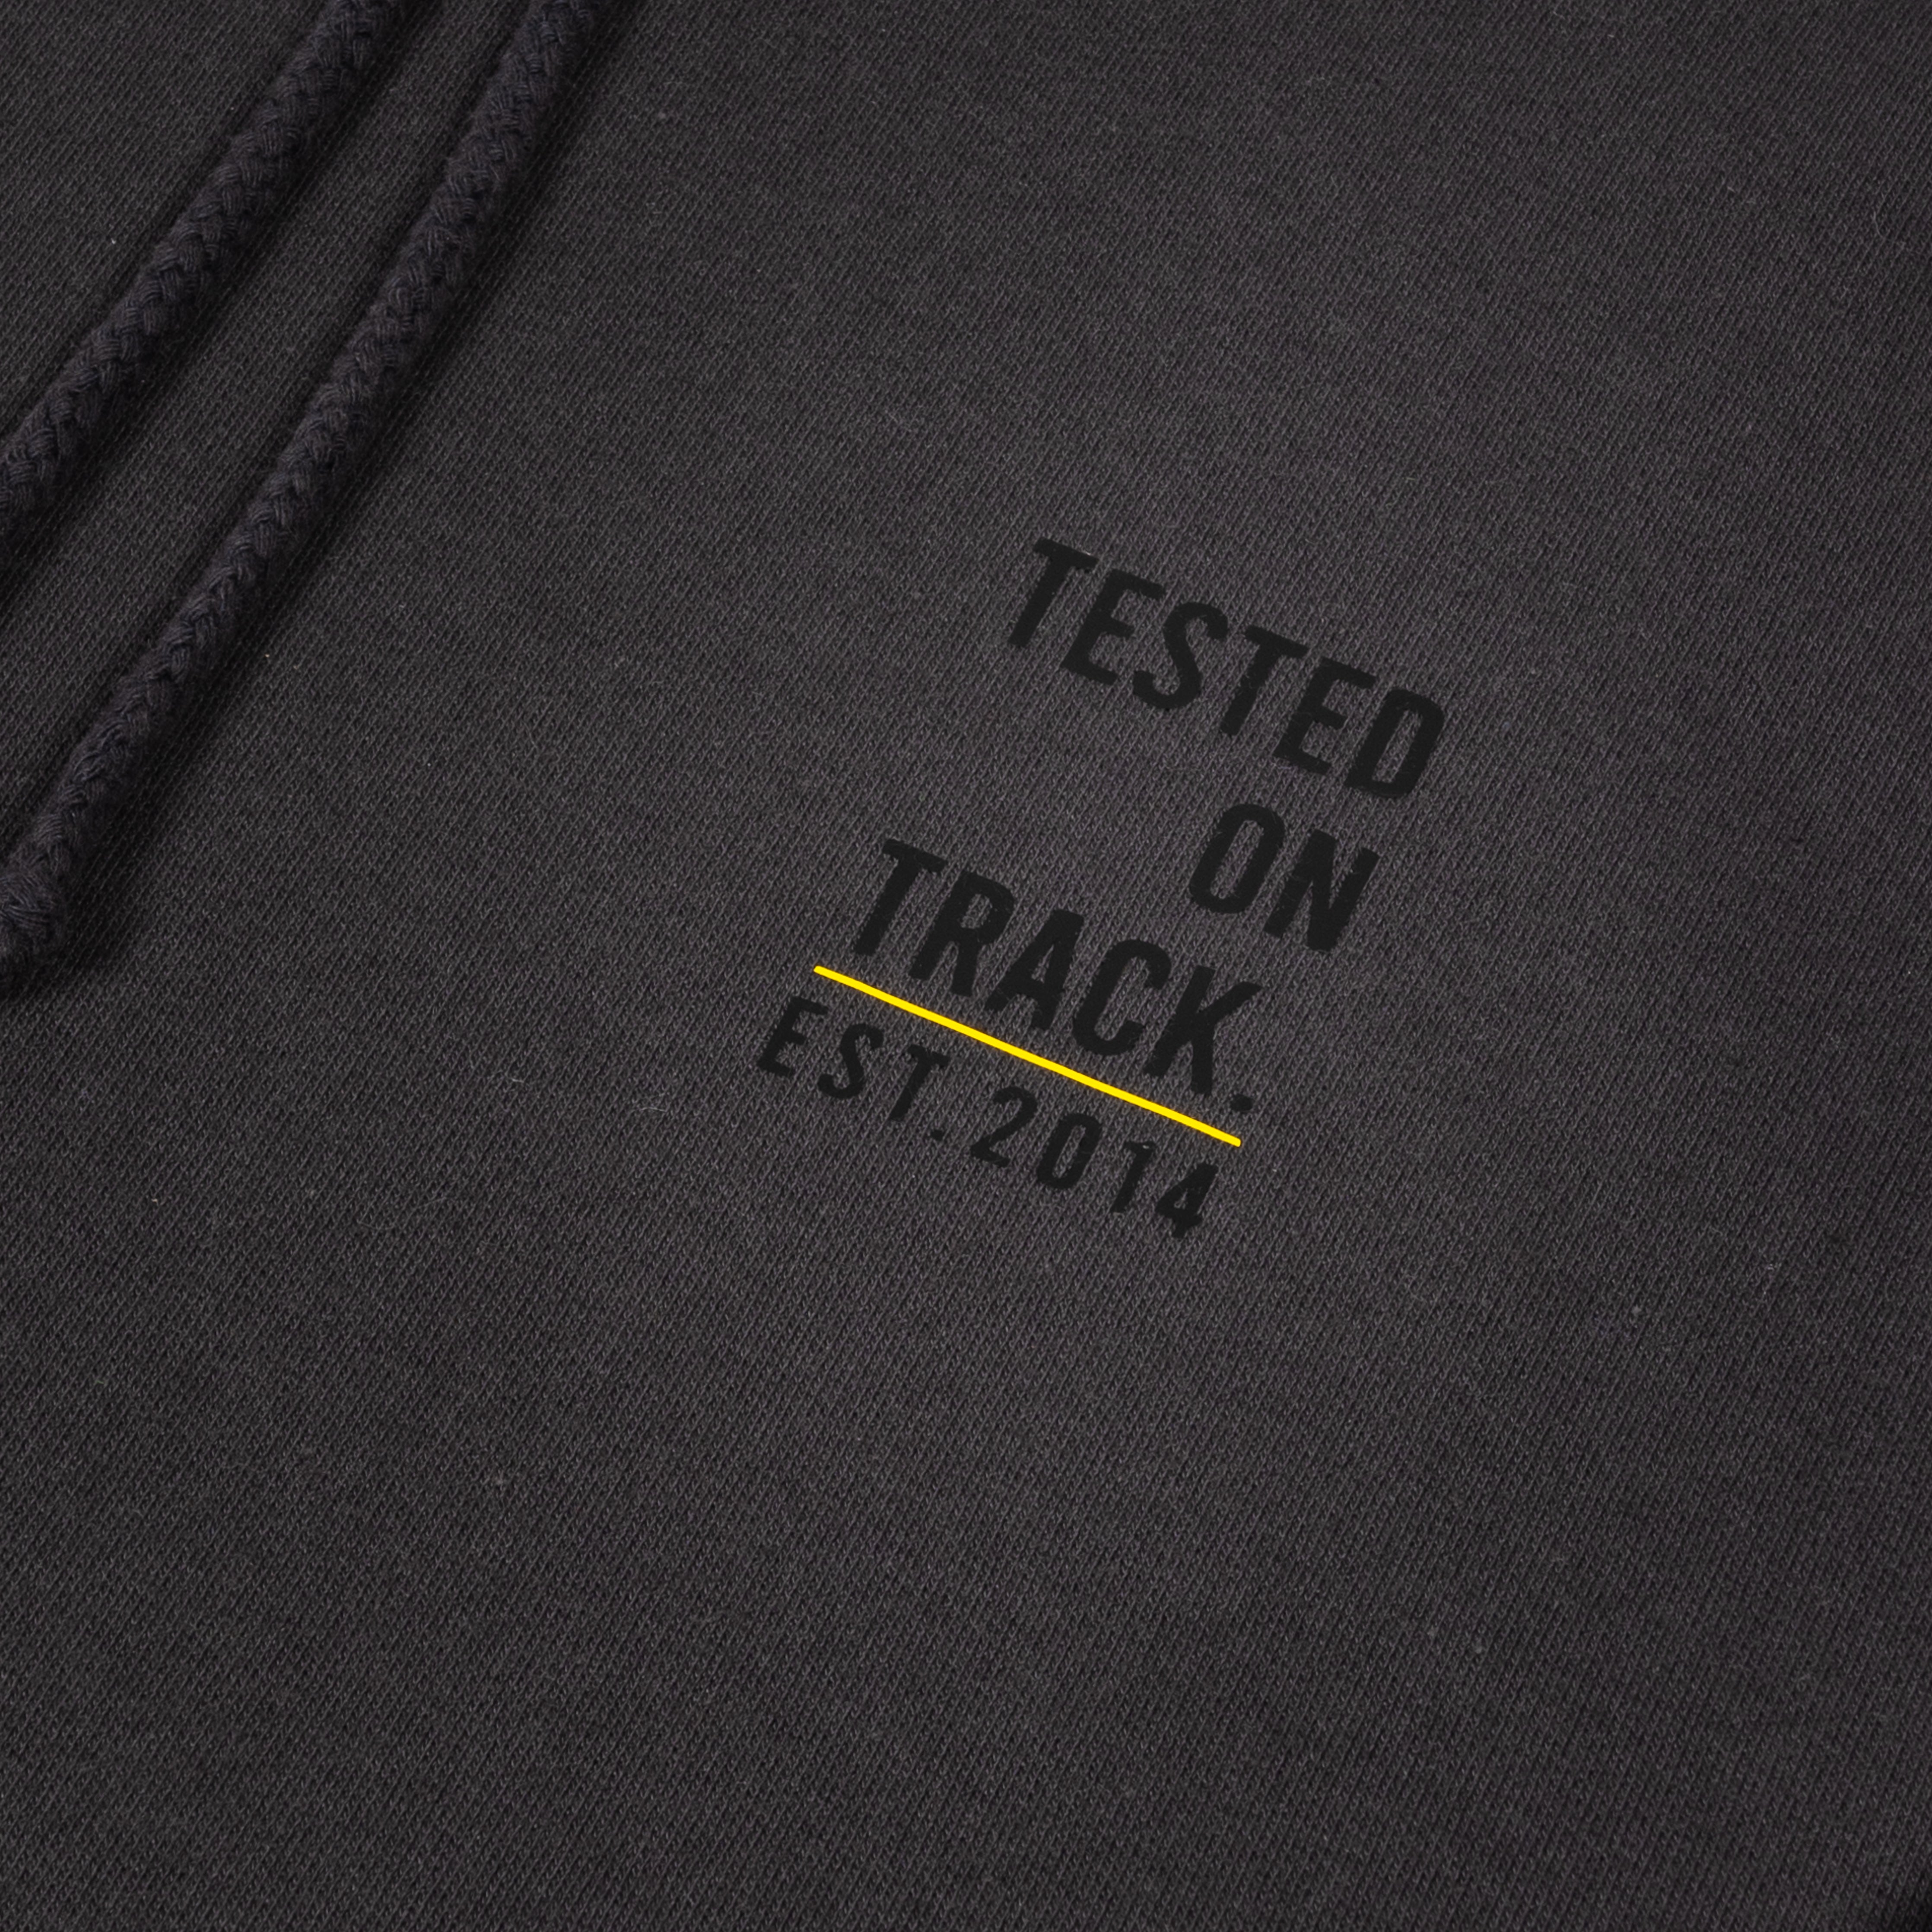 TESTED ON TRACK